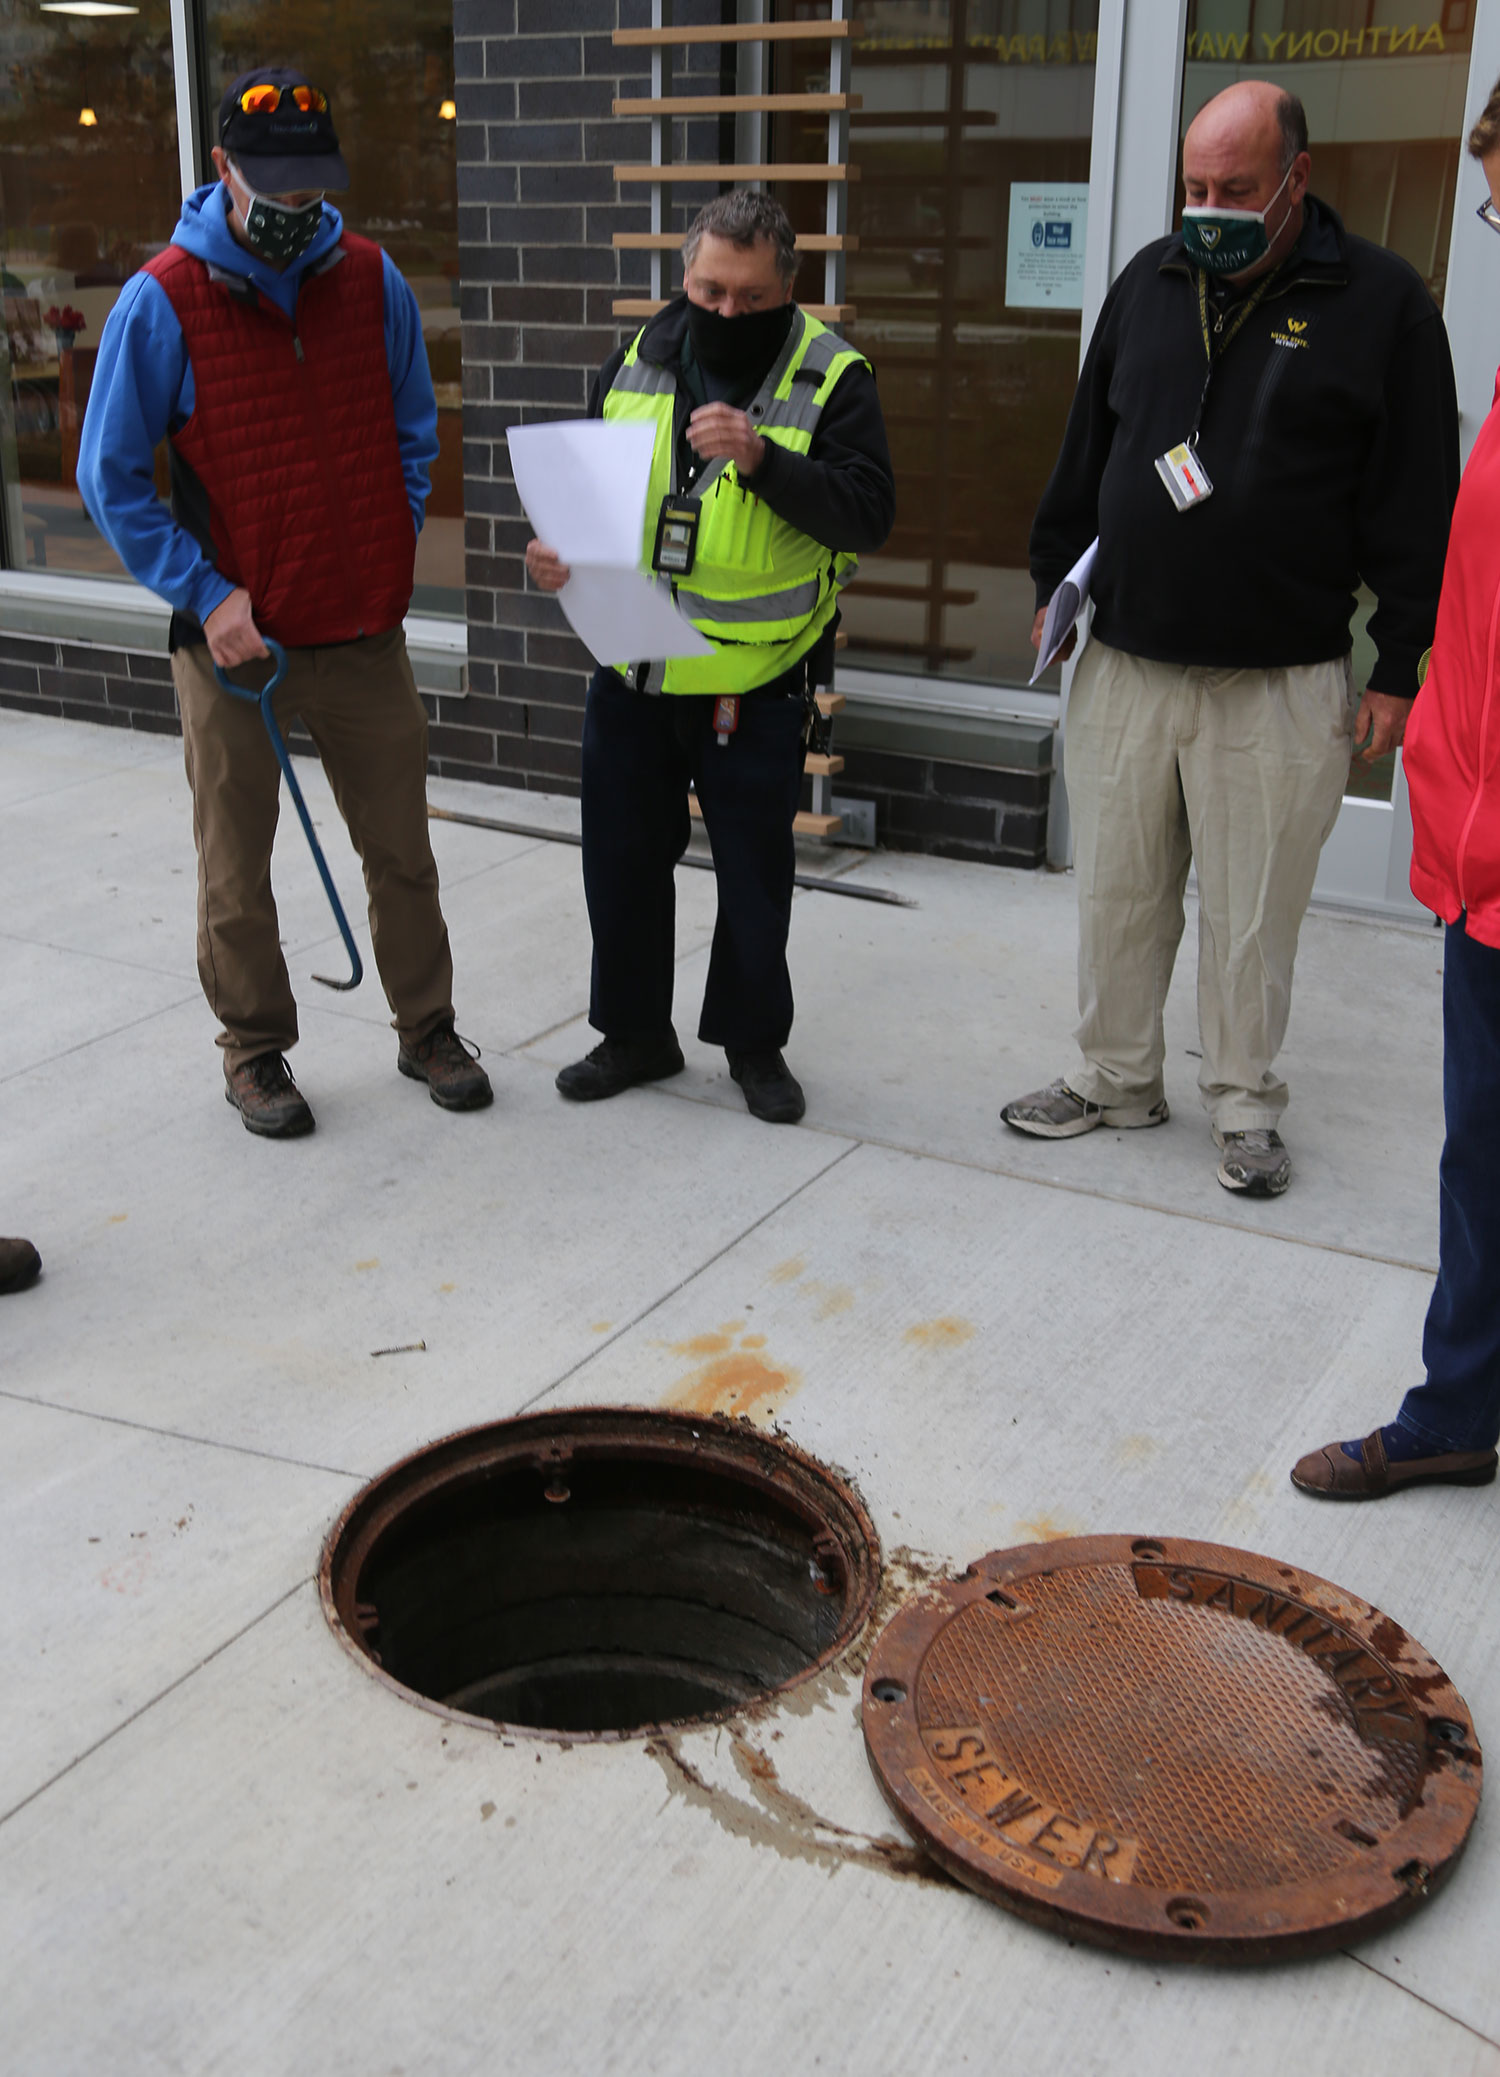 Researchers accessed a sewer at Anthony Wayne Apartments